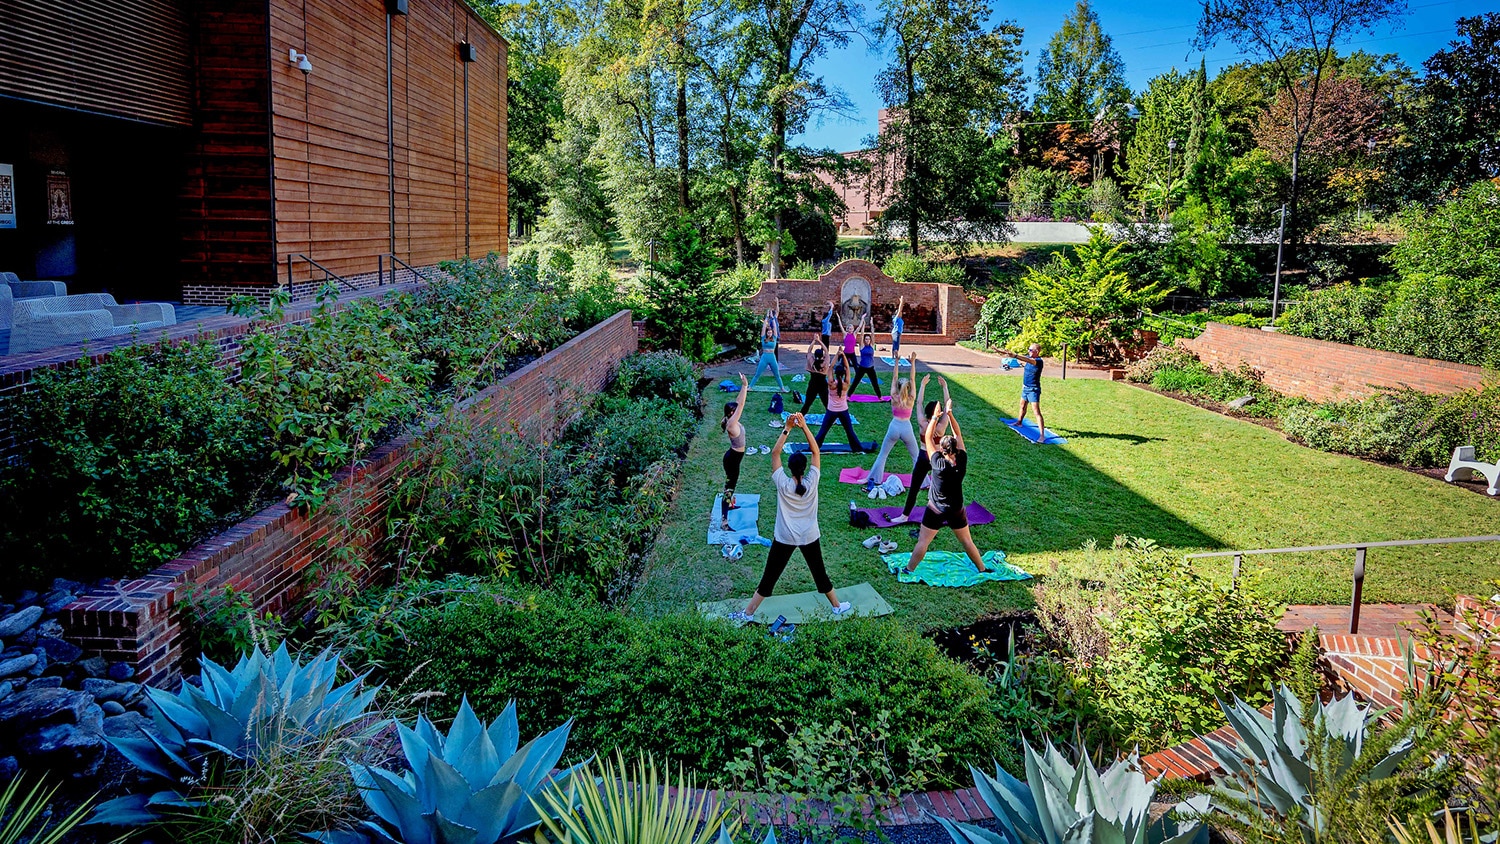 A yoga class in the gardens of the Gregg Museum of Art & Design.